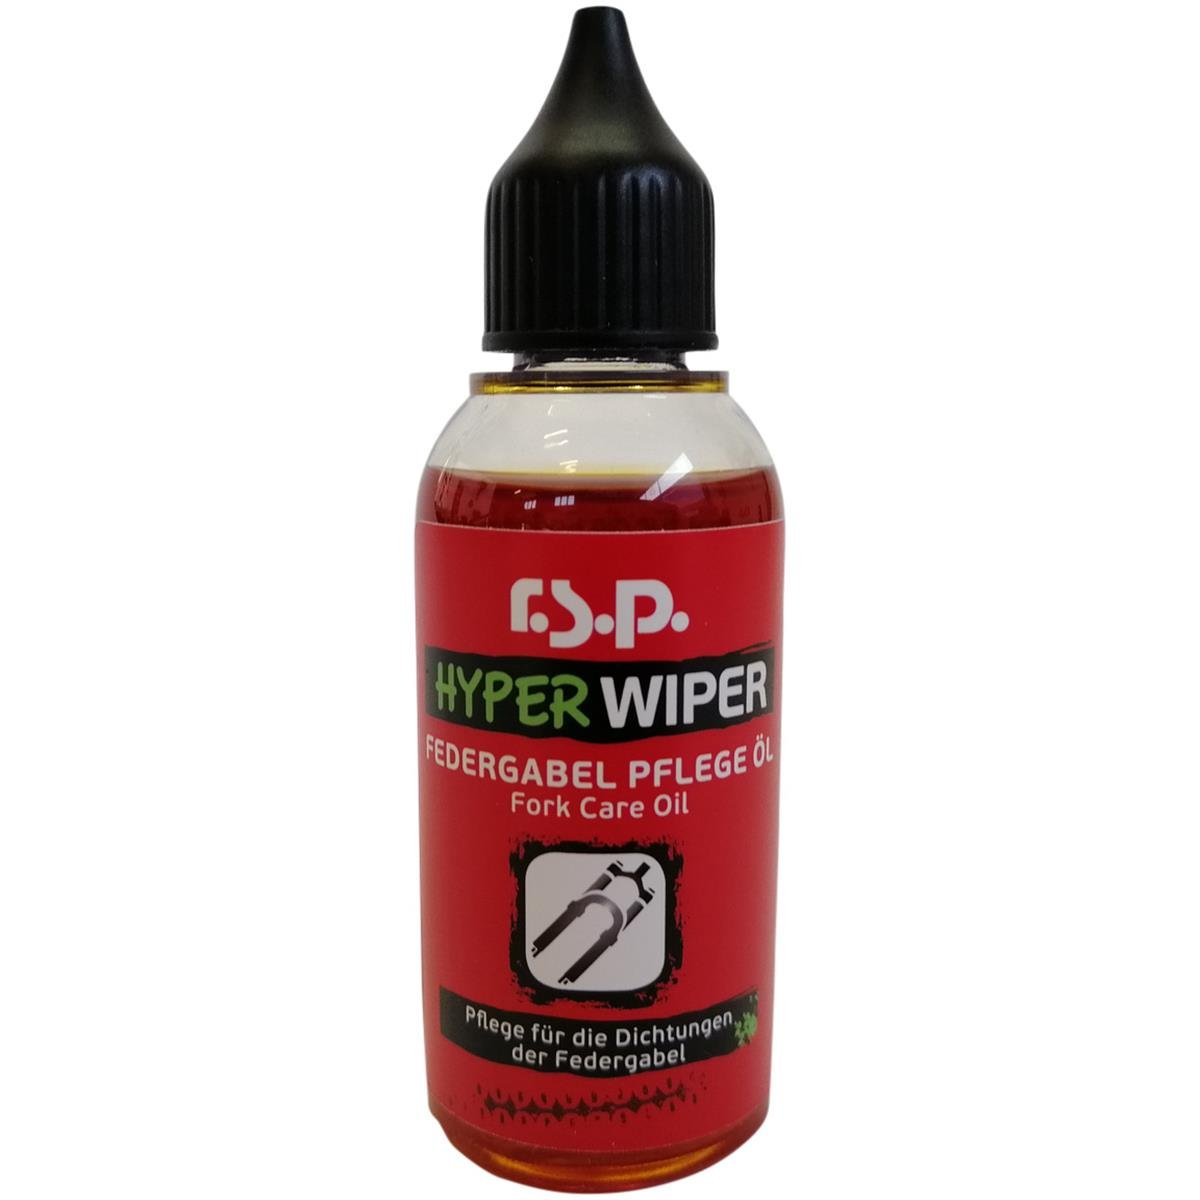 r.s.p. Fork Maintenance Oil Hyper Wiper Cares for the seals